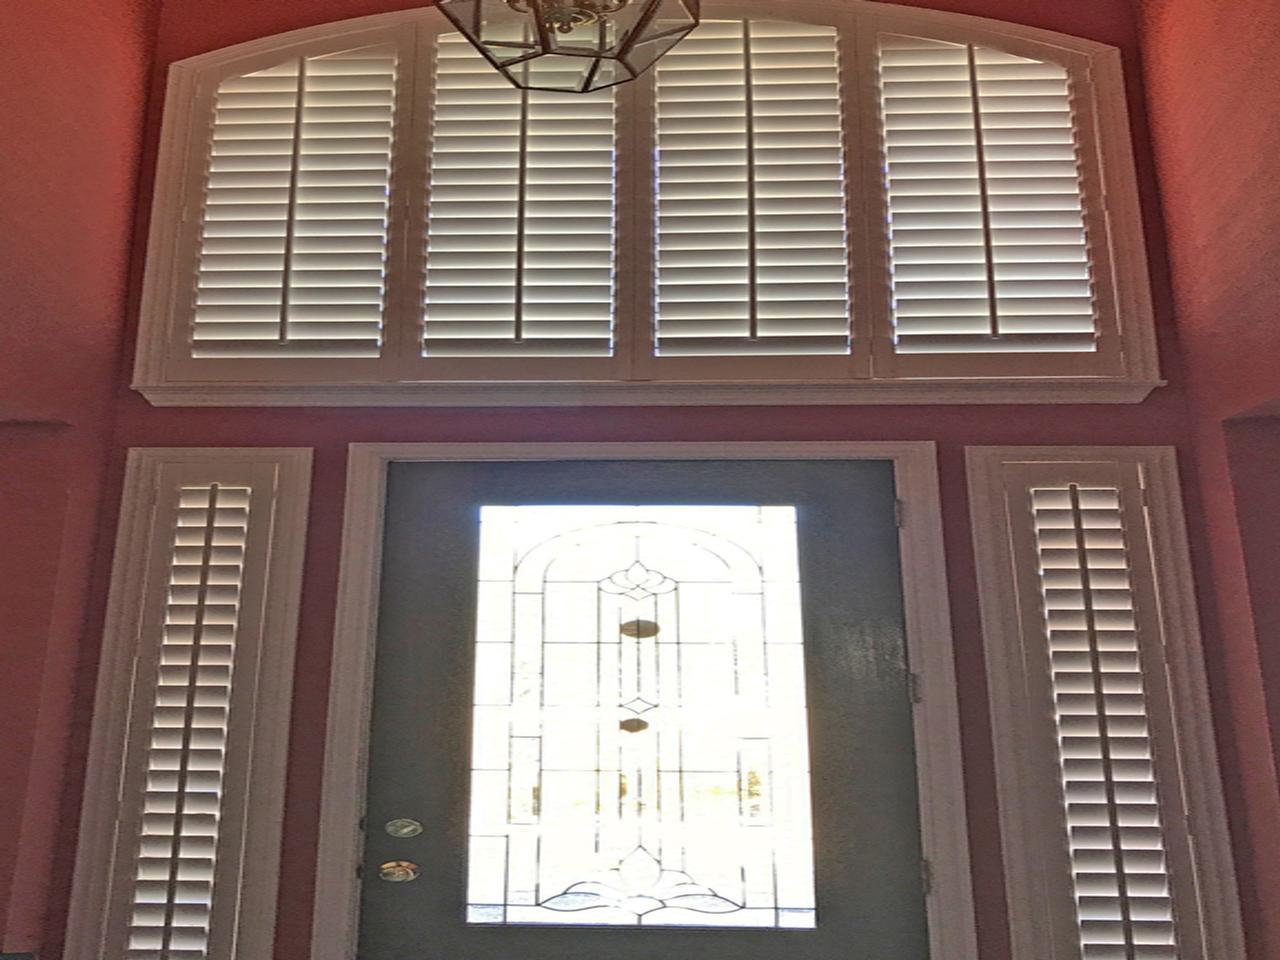 Two story foyer with interior shutters on the sidelights and arched window over the door